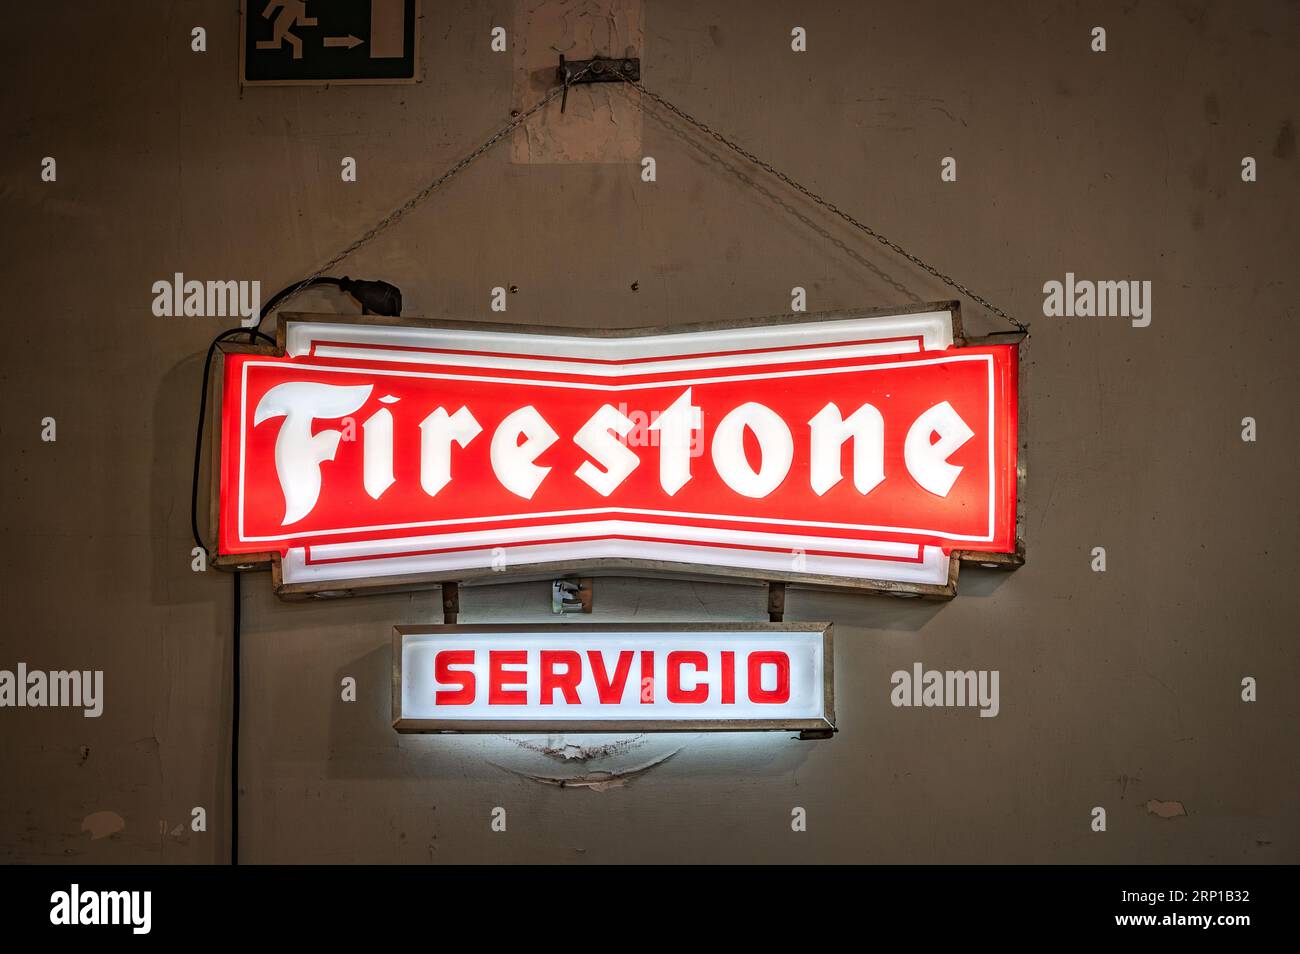 A closeup of an old illuminated sign for the Firestone service station in an old workshop Stock Photo